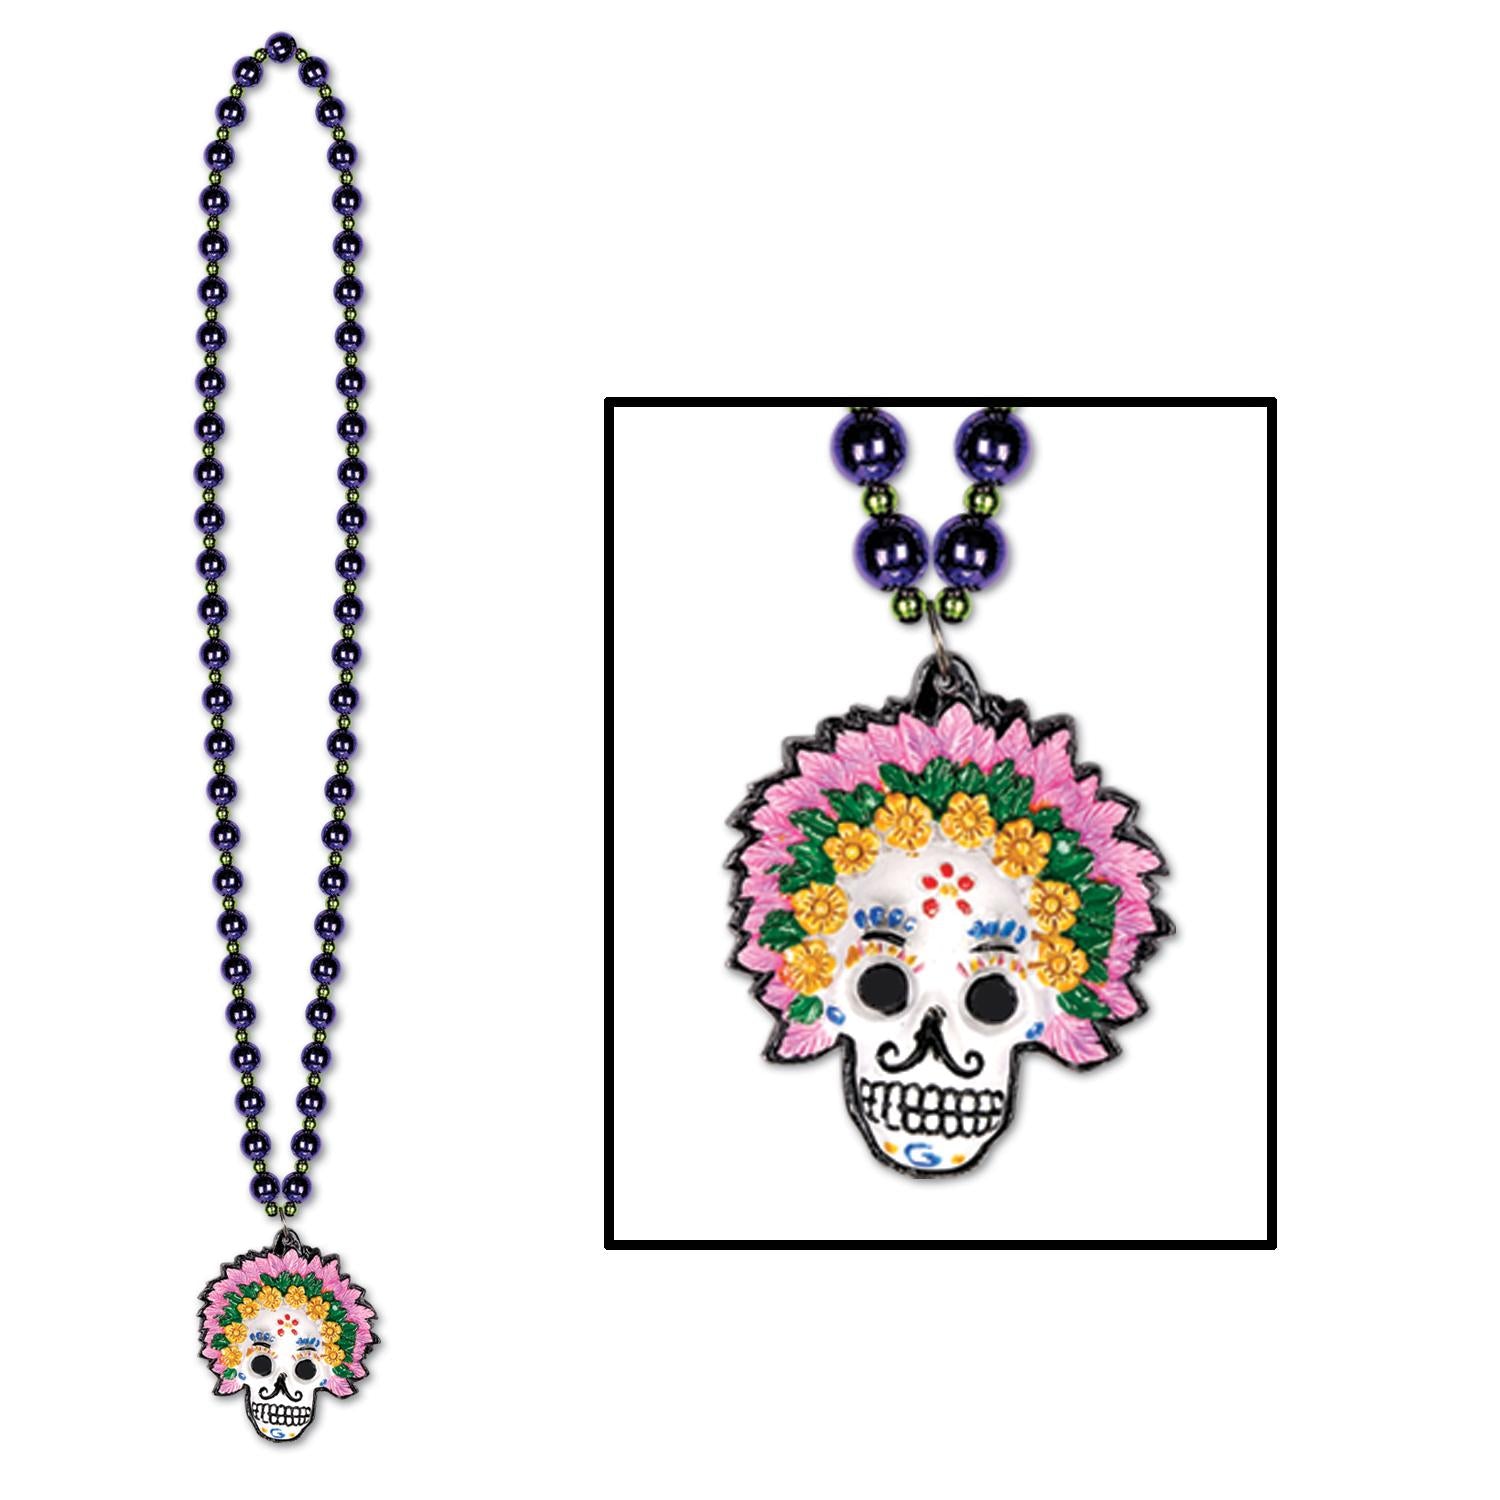 Beistle Bead Necklaces with Day Of The Dead Medallion